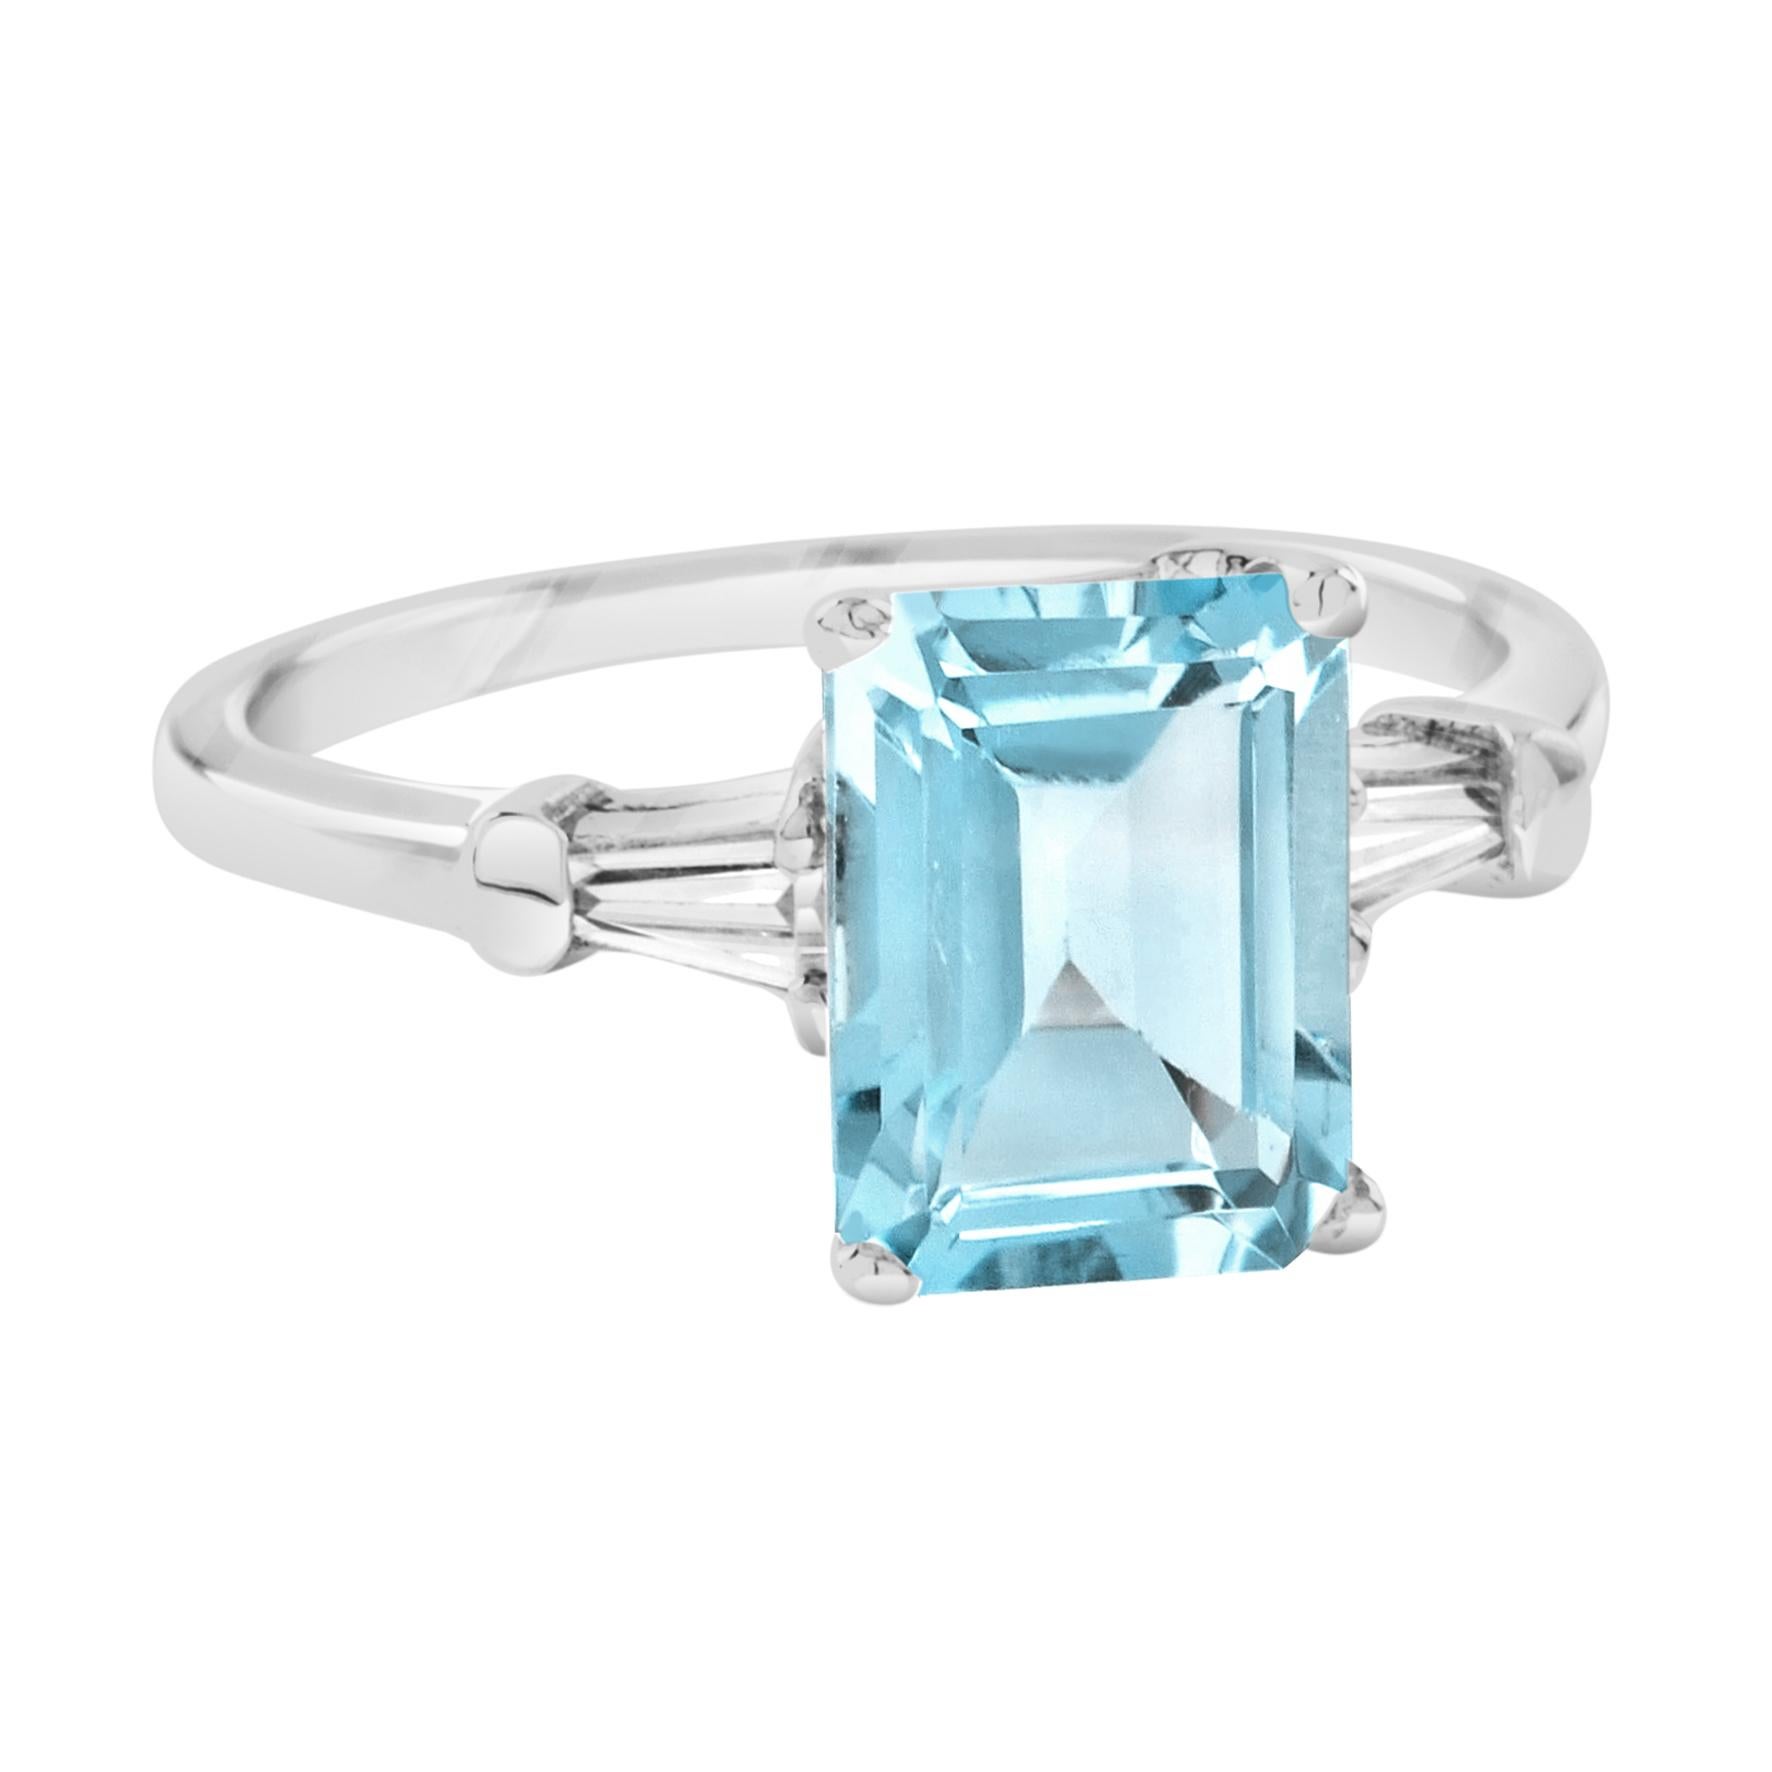 The One Blue Topaz with Baguette Diamond Engagement Ring in 14K White Gold 2